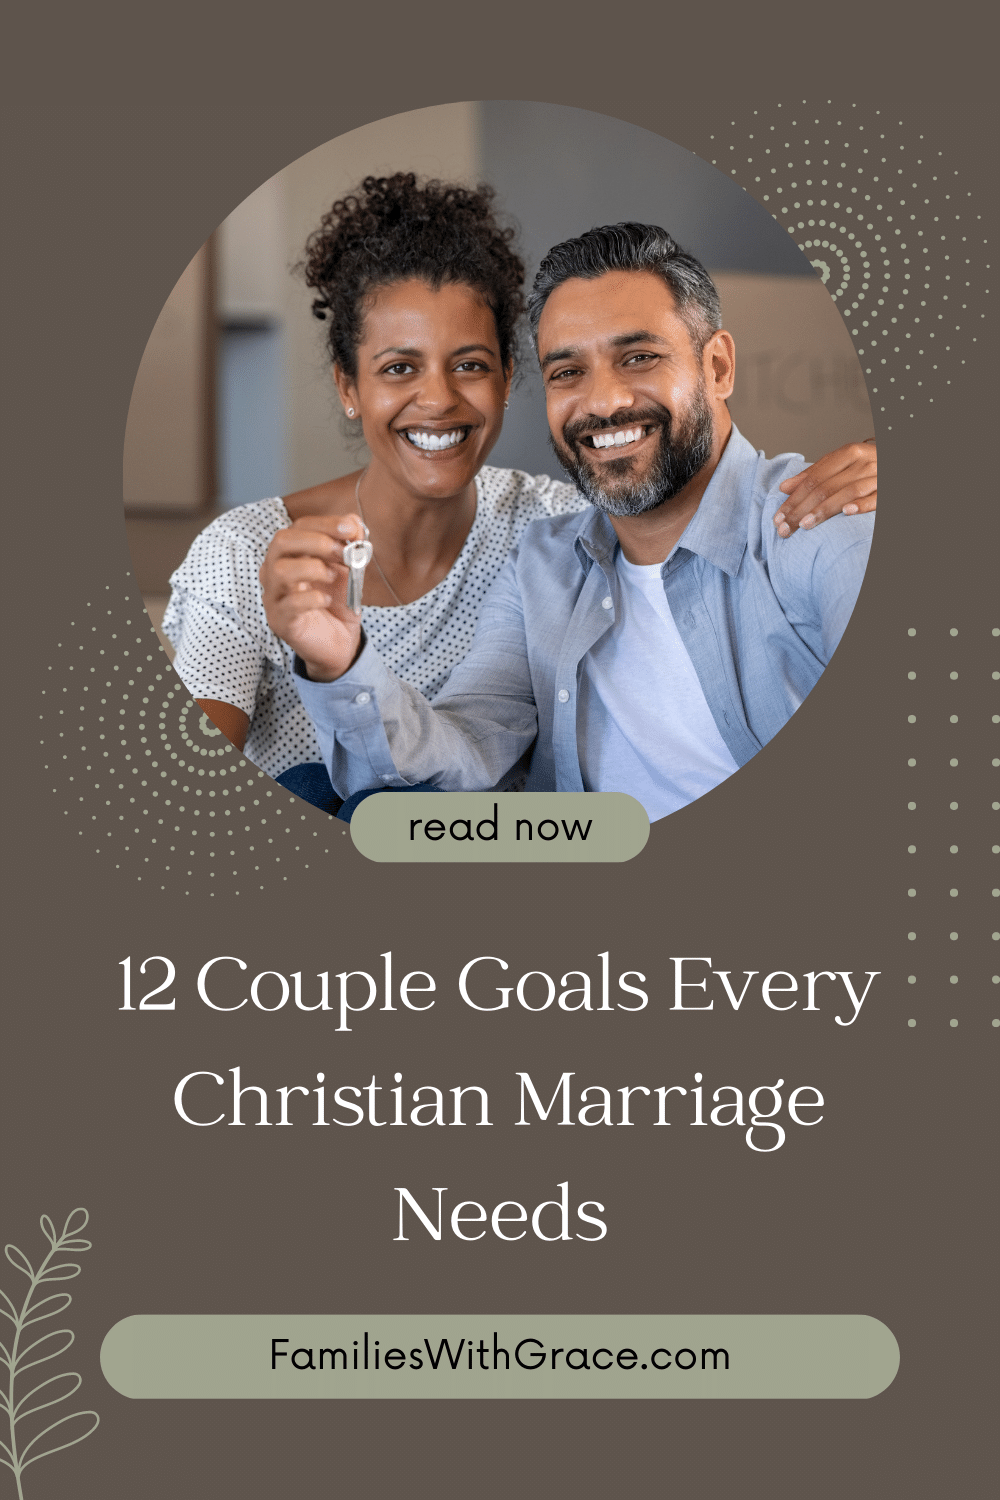 Couple goals every Christian marriage needs